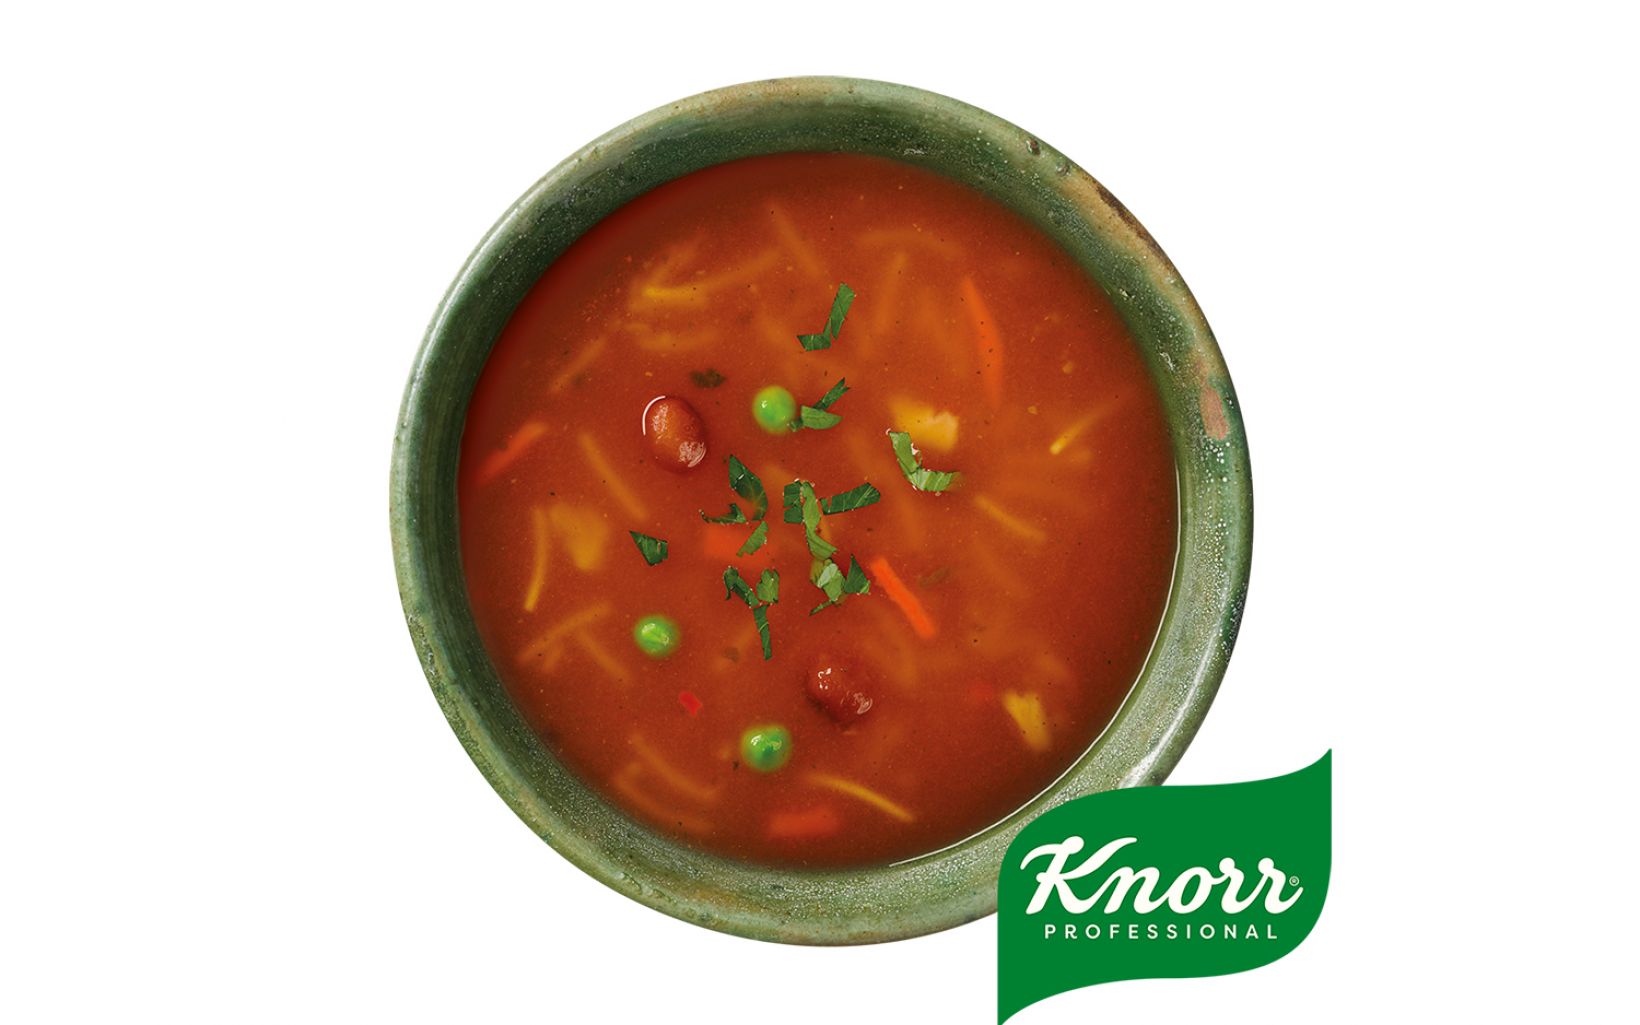 72476 20074 Uk Knorr Classic Minestrone Soup With Logo Supp Image 1200x1200px 20203pm